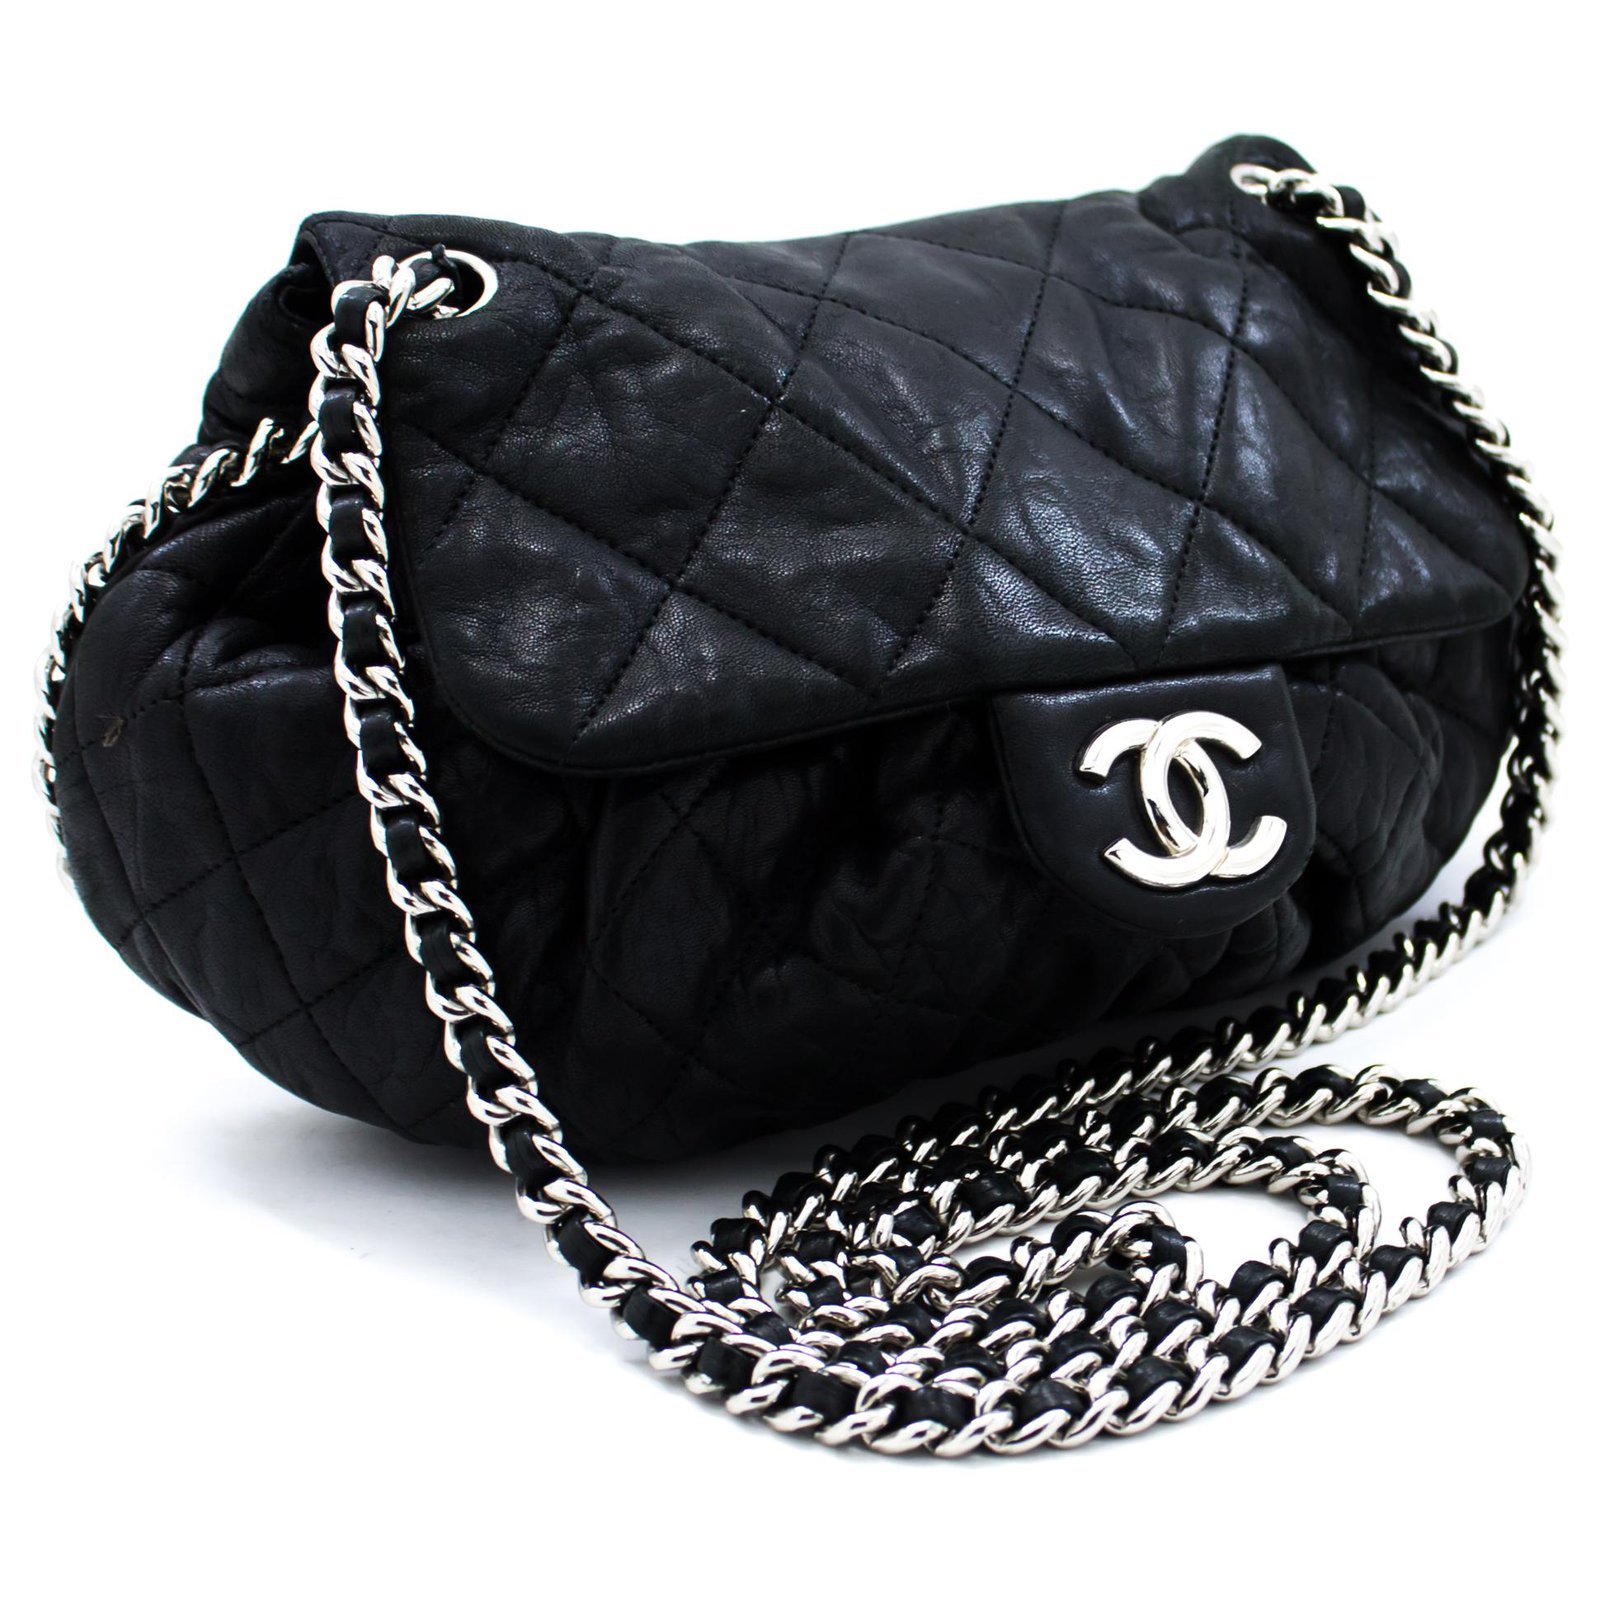 The History of Chanel Flap Bag - Dressed by Ava